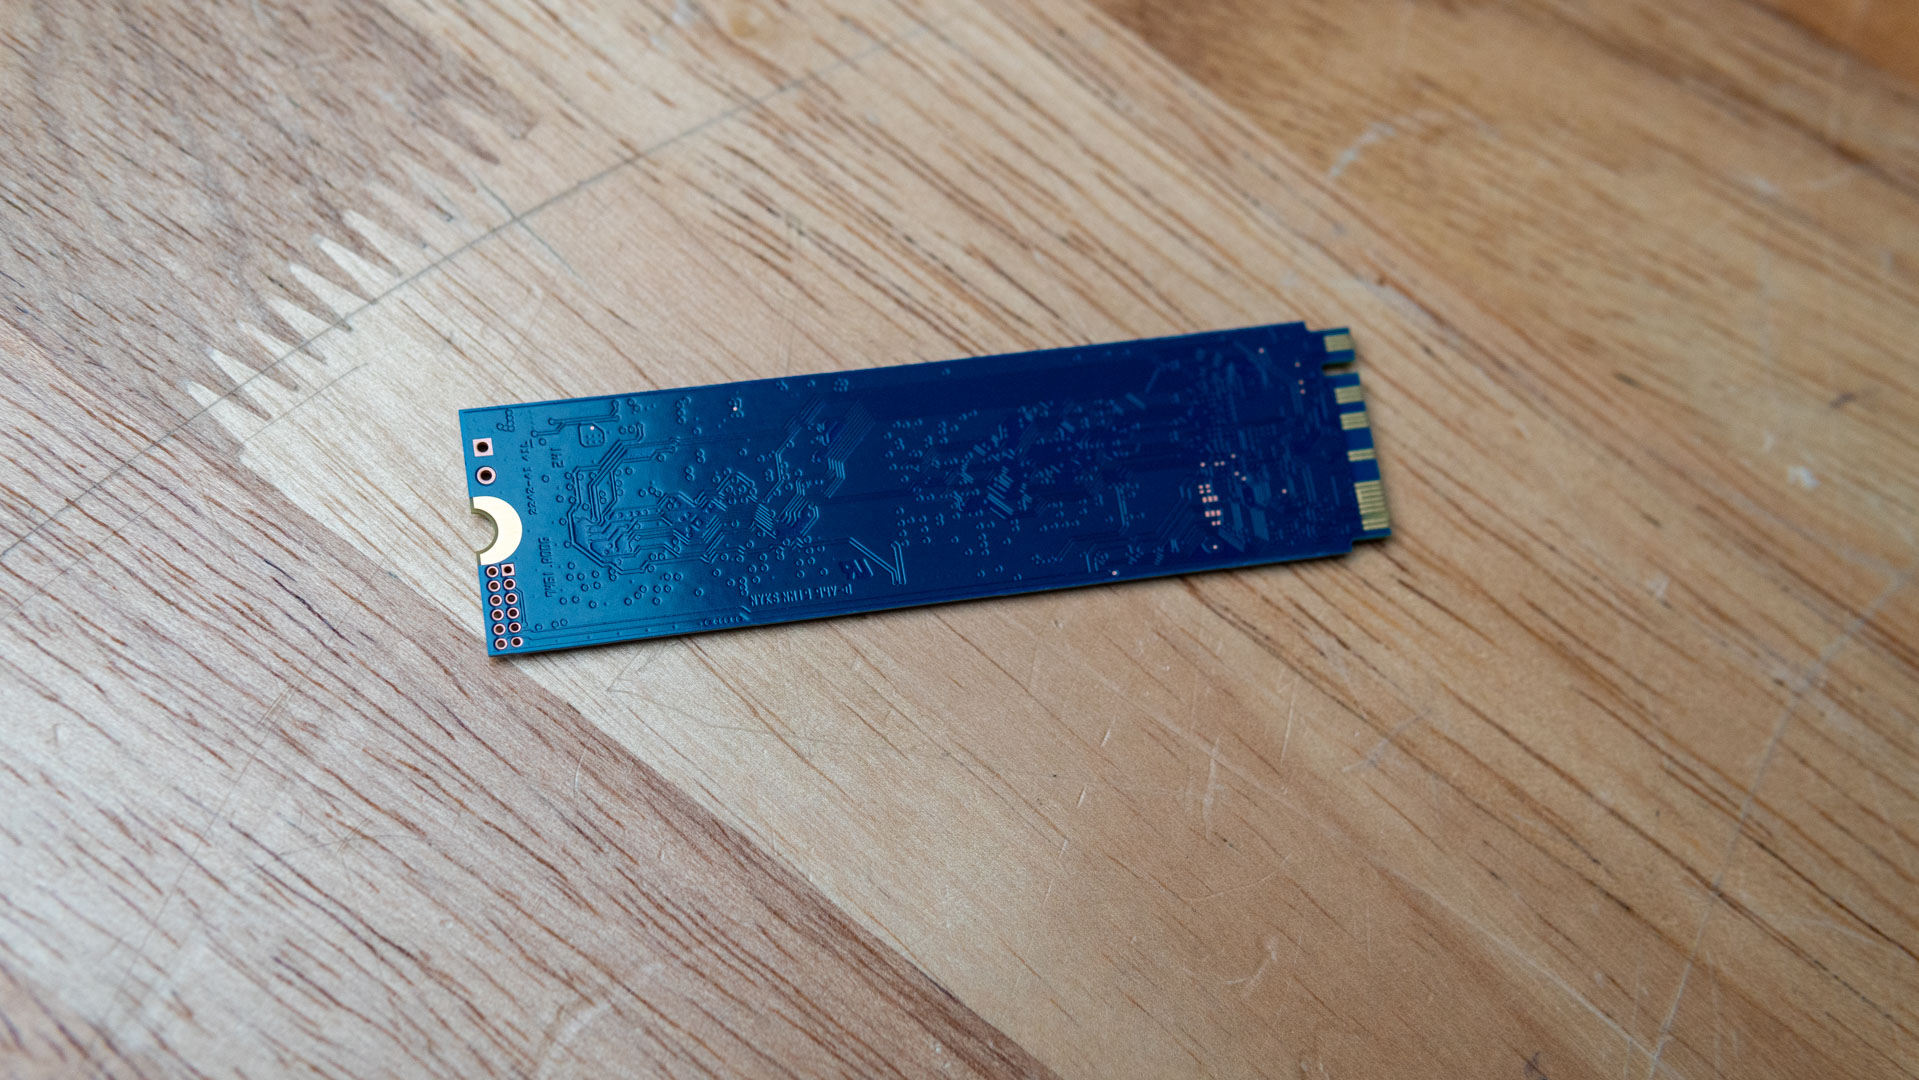 Hands-on review: Kingston 2TB NV2 PCIe 4.0 NVMe M.2 SSD